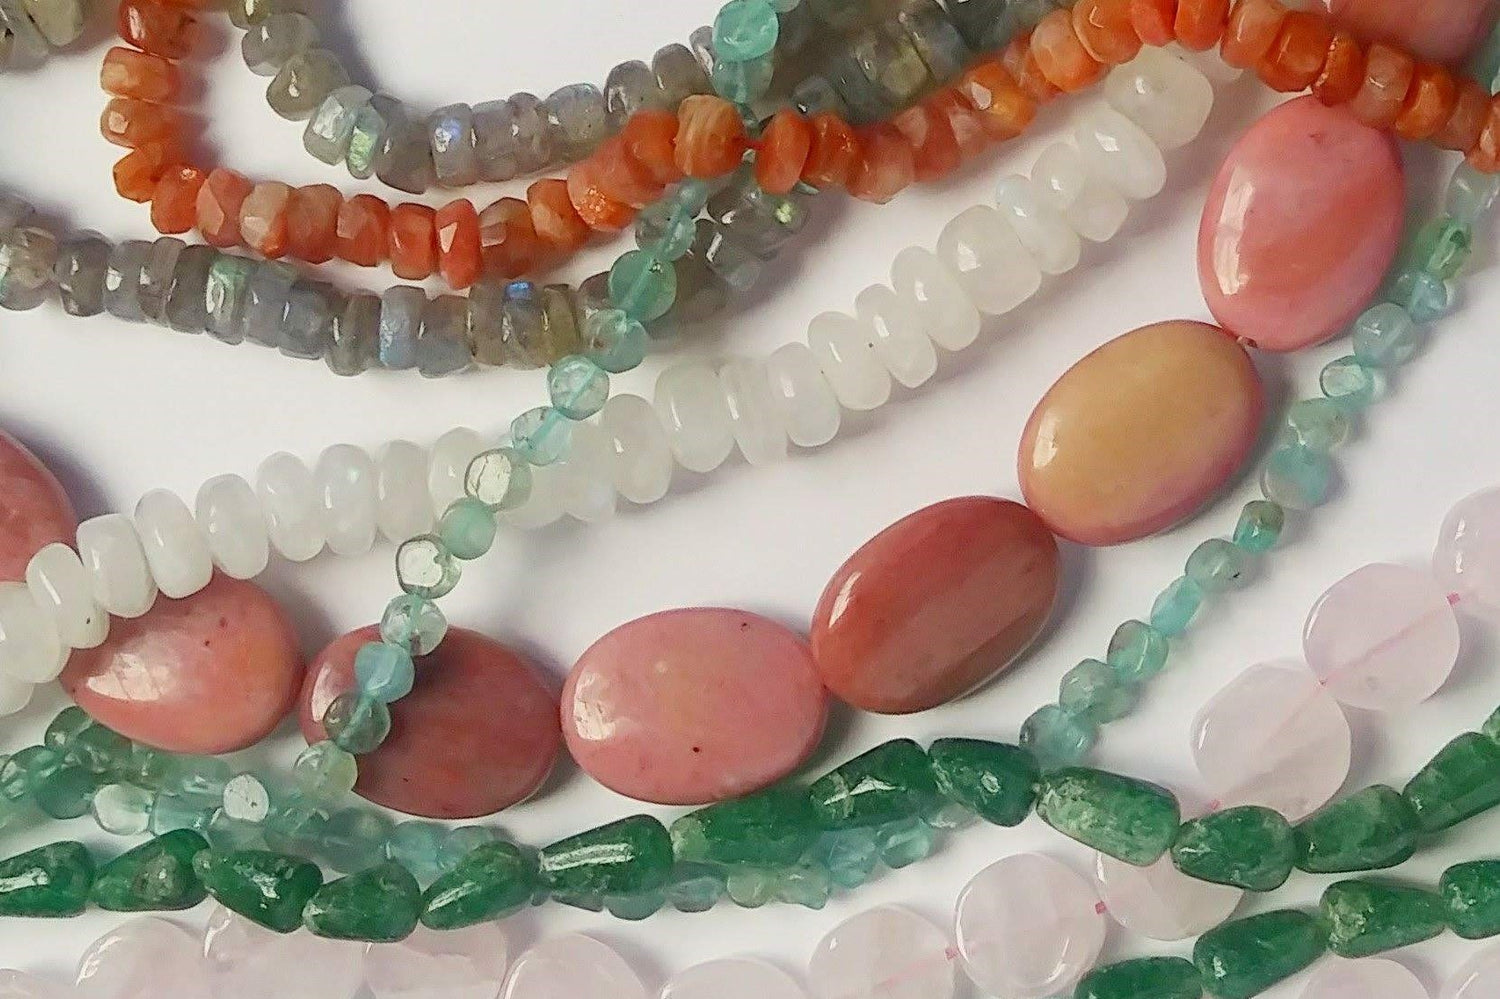 natural gemstones of various colors, shapes, and sizes